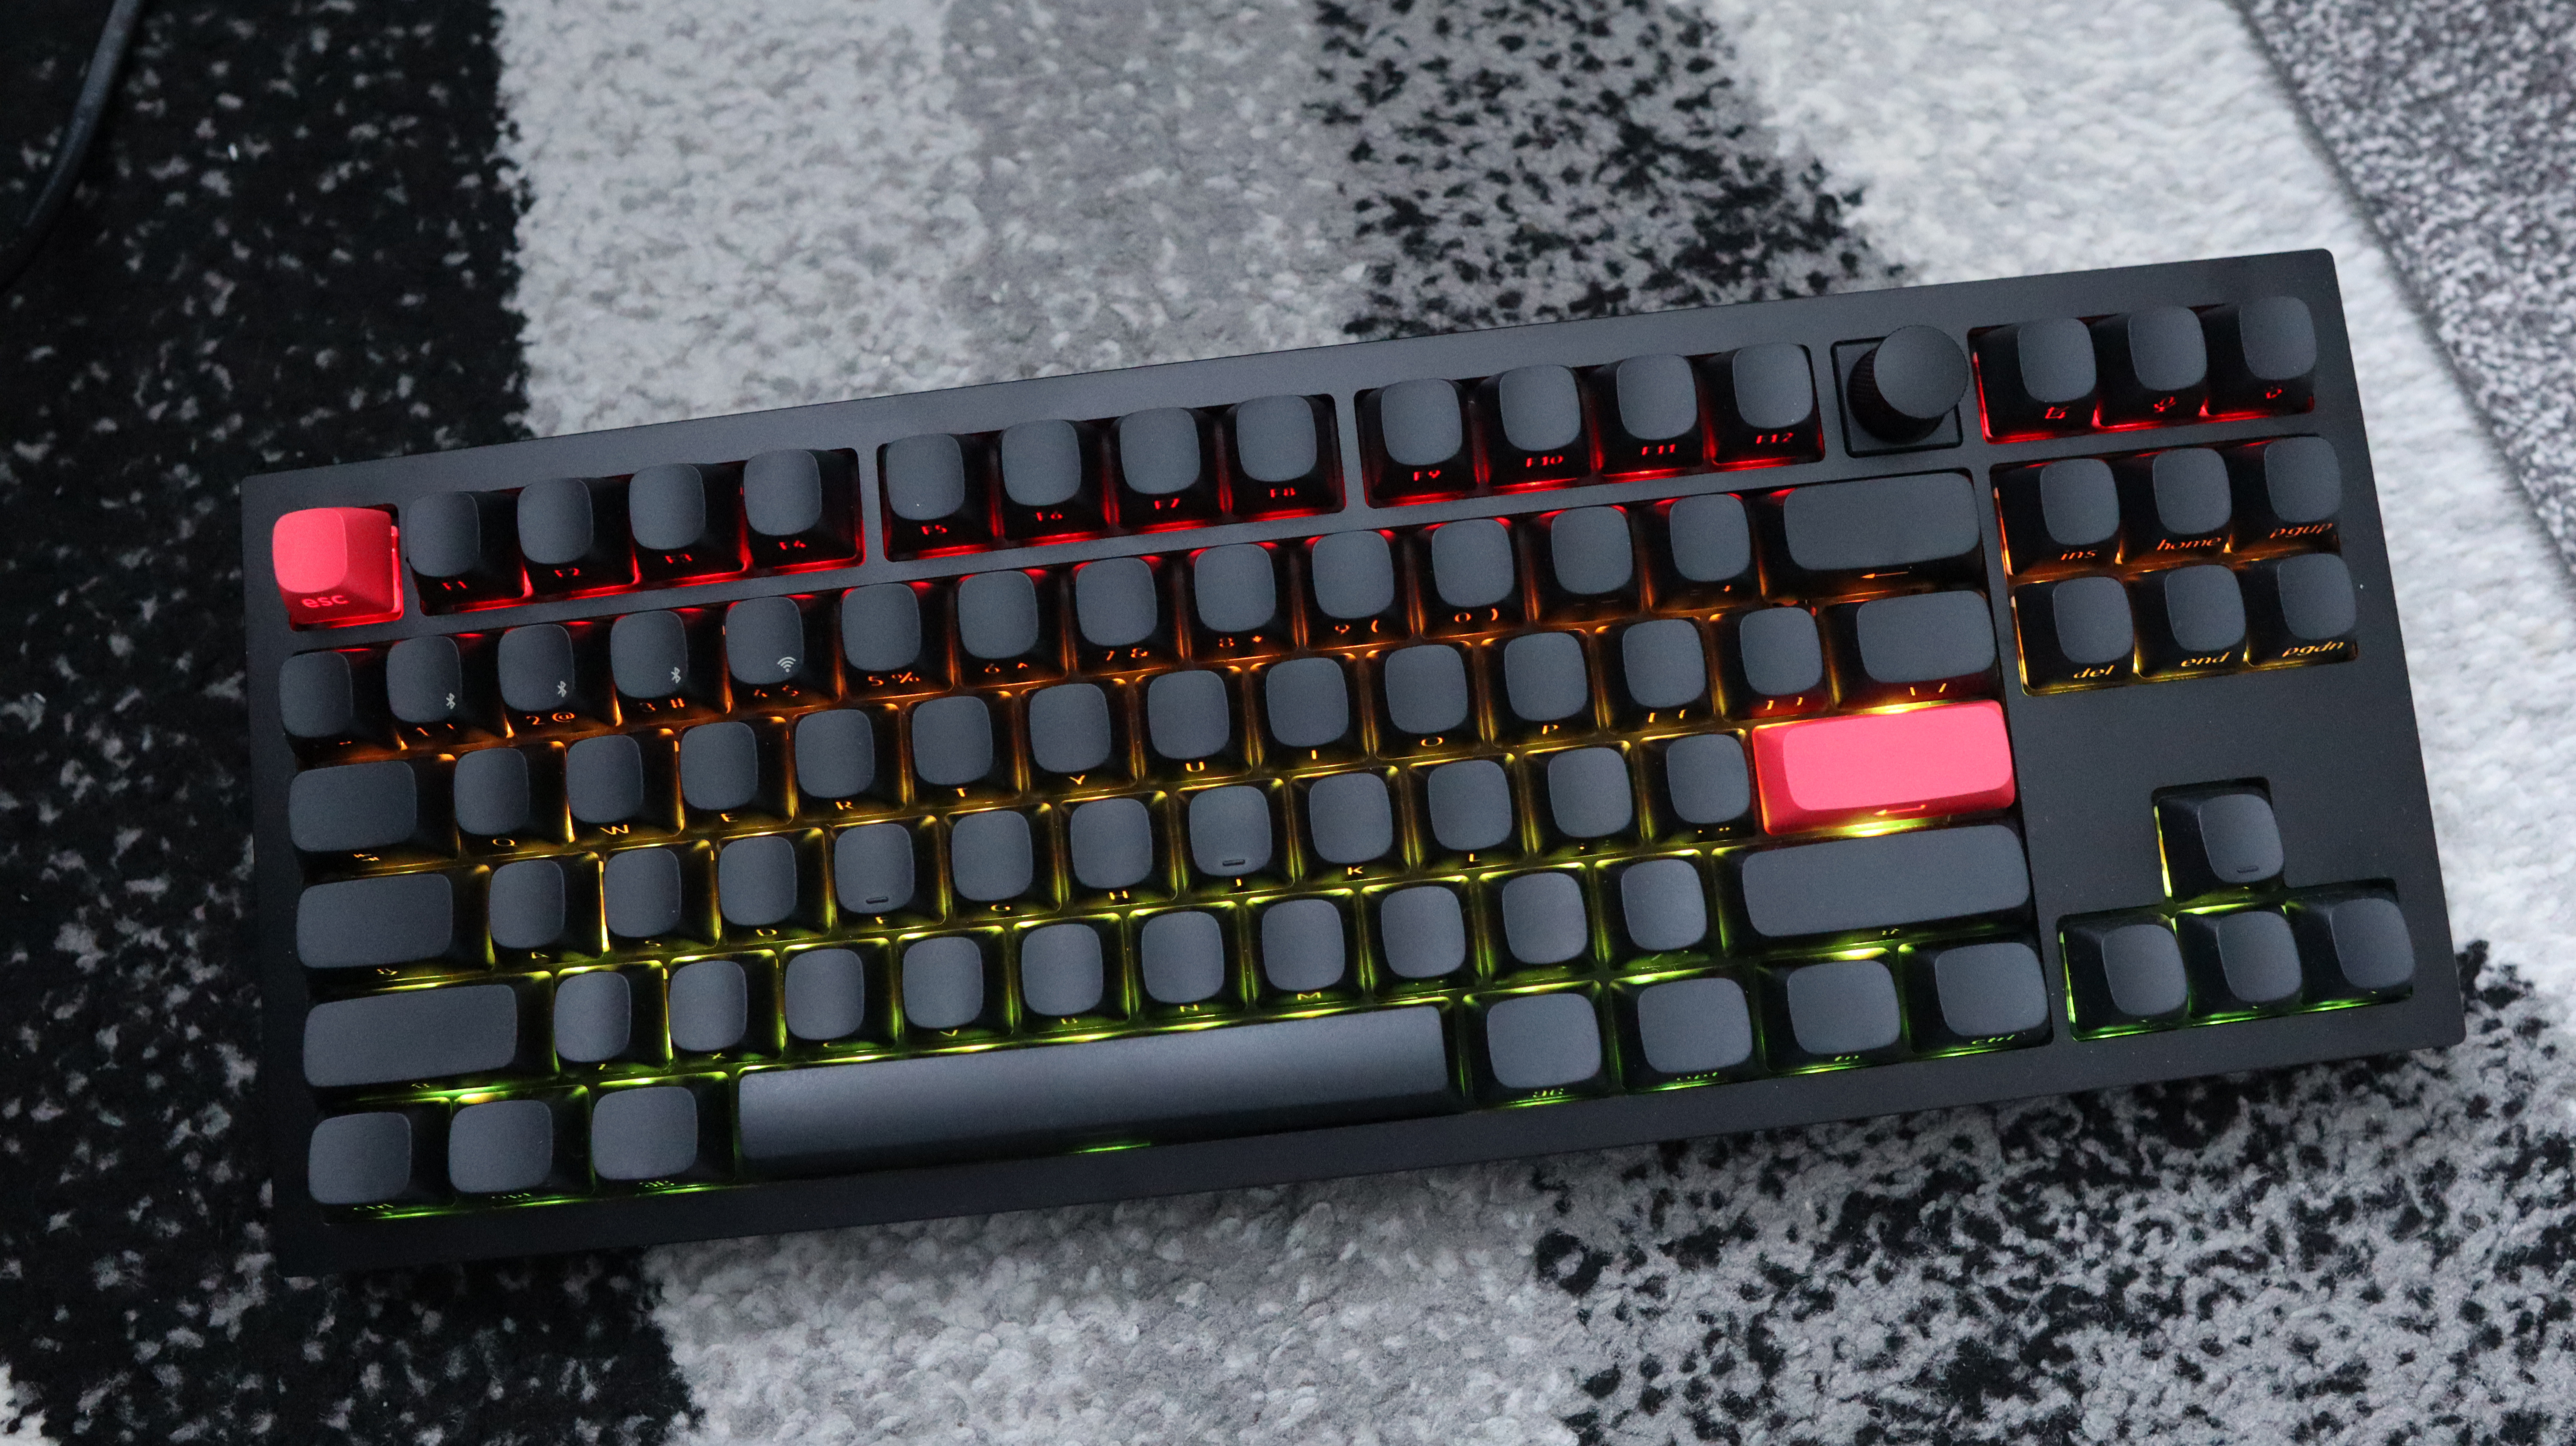 The Keychron Q3 Max gaming keyboard set-up on a desk with the RGB lighting enabled.